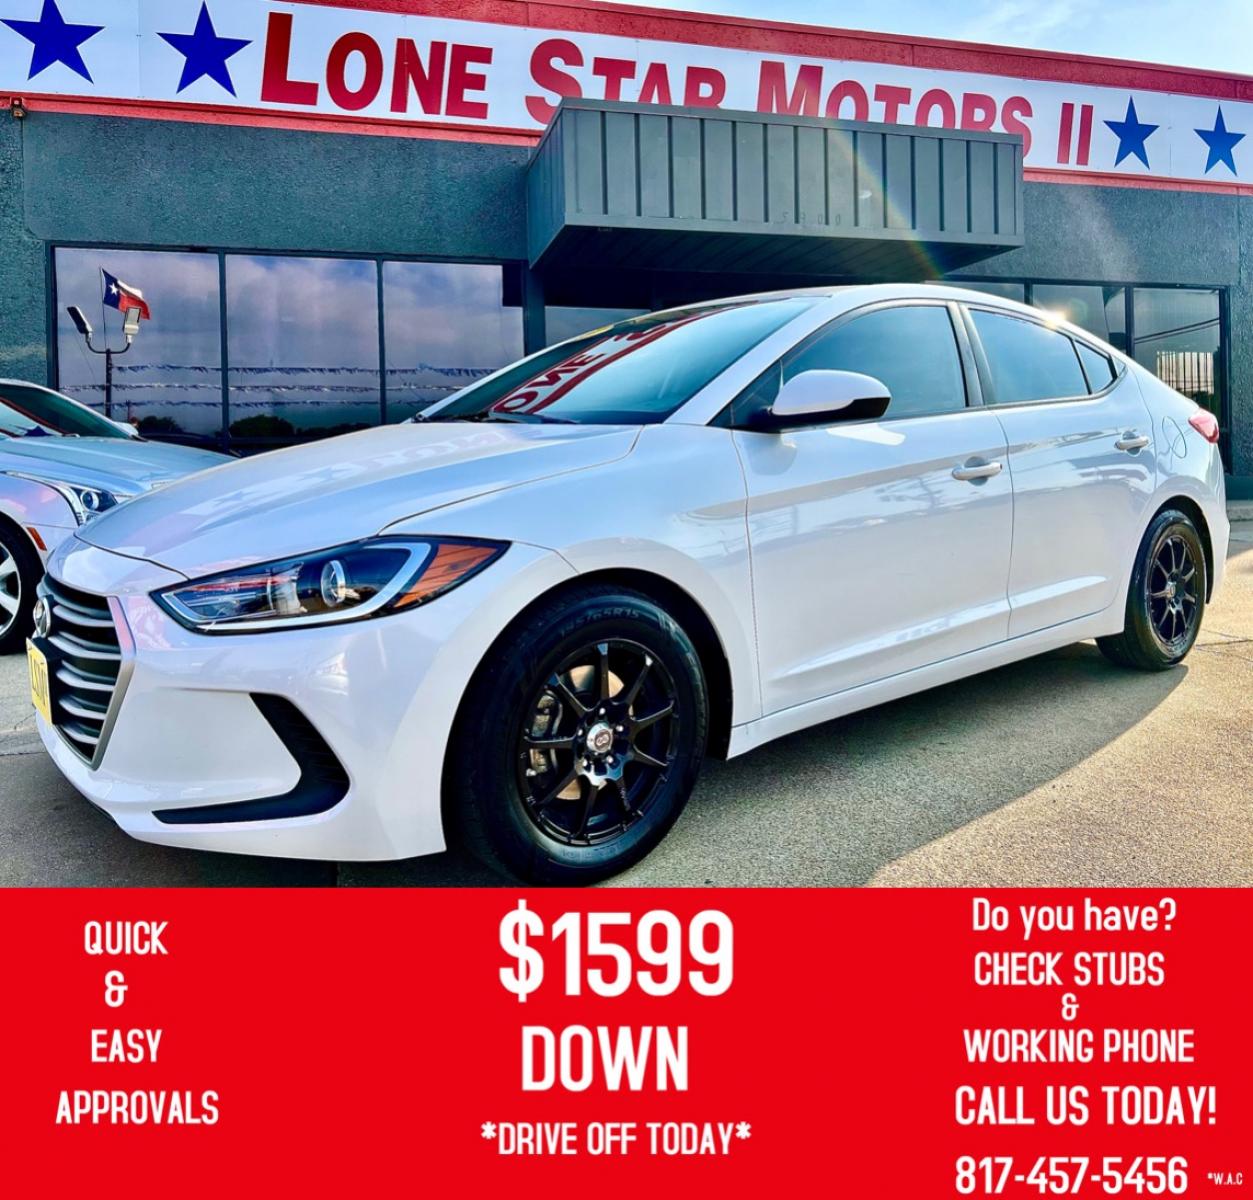 2017 WHITE HYUNDAI ELANTRA (5NPD74LF7HH) , located at 5900 E. Lancaster Ave., Fort Worth, TX, 76112, (817) 457-5456, 0.000000, 0.000000 - This is a 2017 HYUNDAI ELANTRA 4 DOOR SEDAN that is in excellent condition. There are no dents or scratches. The interior is clean with no rips or tears or stains. All power windows, door locks and seats. Ice cold AC for those hot Texas summer days. It is equipped with a CD player, AM/FM radio, AUX - Photo #0